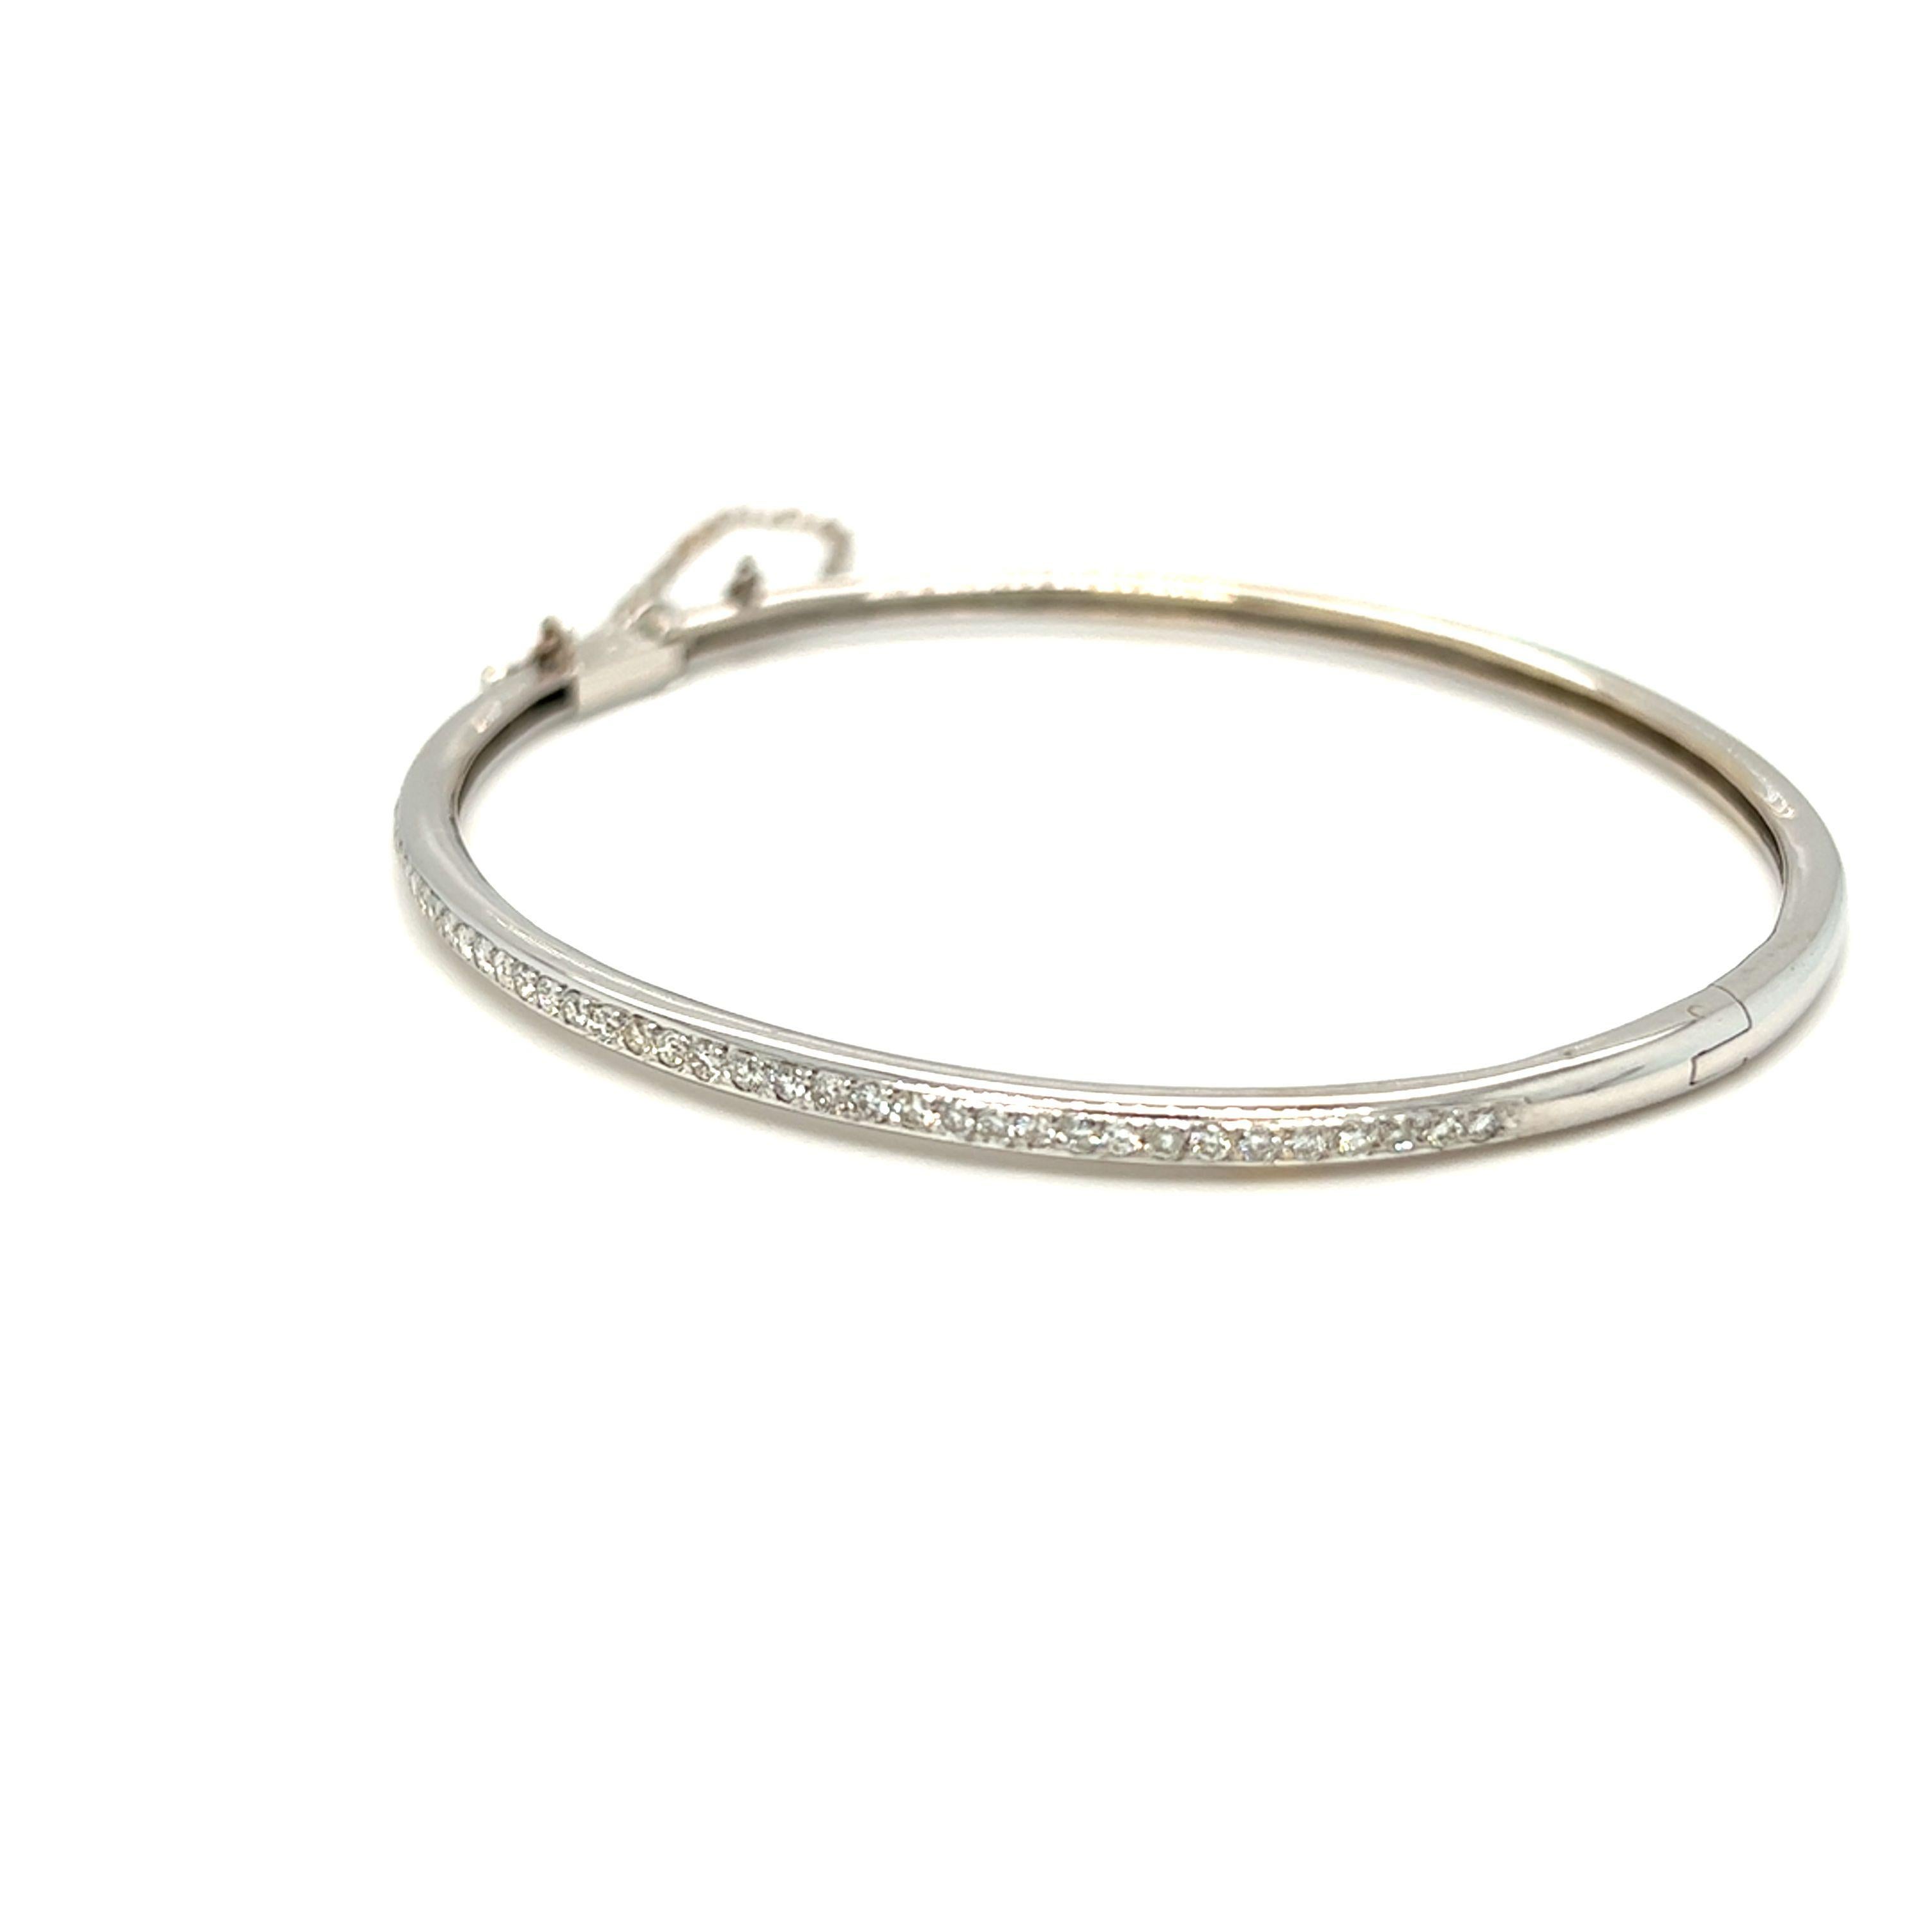 A classic wardrobe staple, perfect for every occasion. This bangle features diamonds that float across the wrist in a delicate shared prong 14k white gold setting. Just perfect amount of sparkle to your bracelet stack. The clasp has a security chain